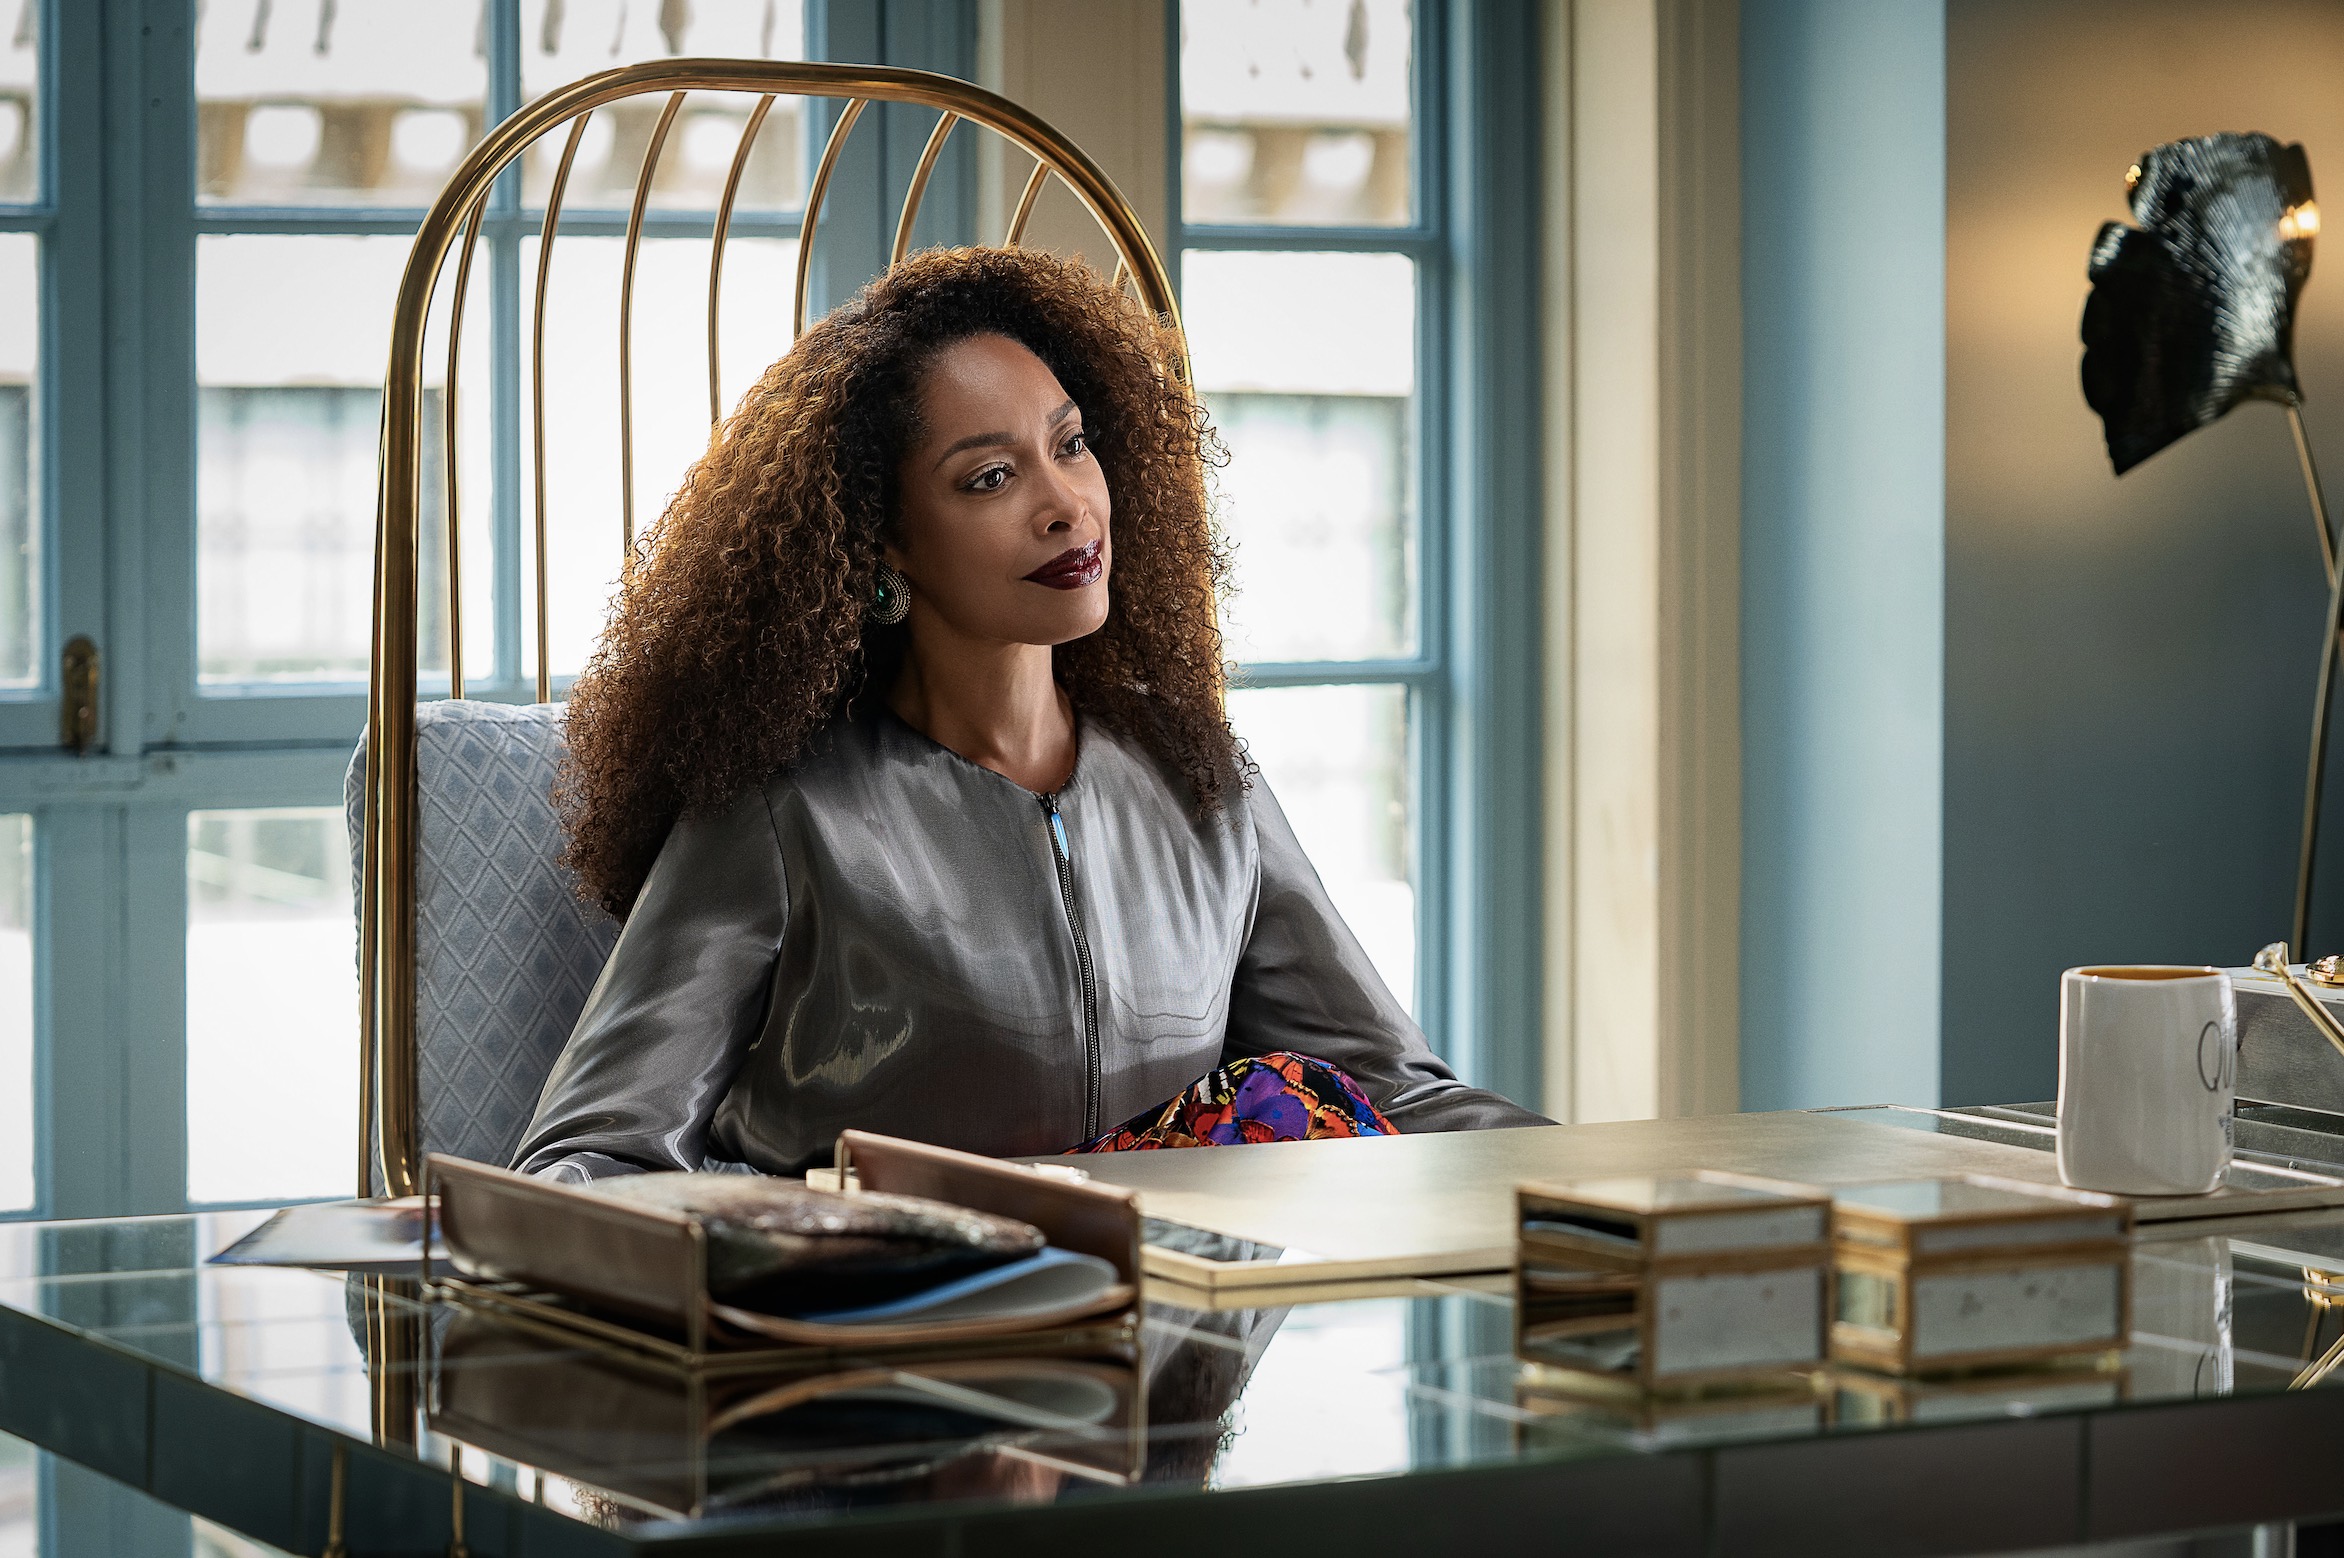 The Perfect Find Cast on Netflix - Gina Torres as Darcy